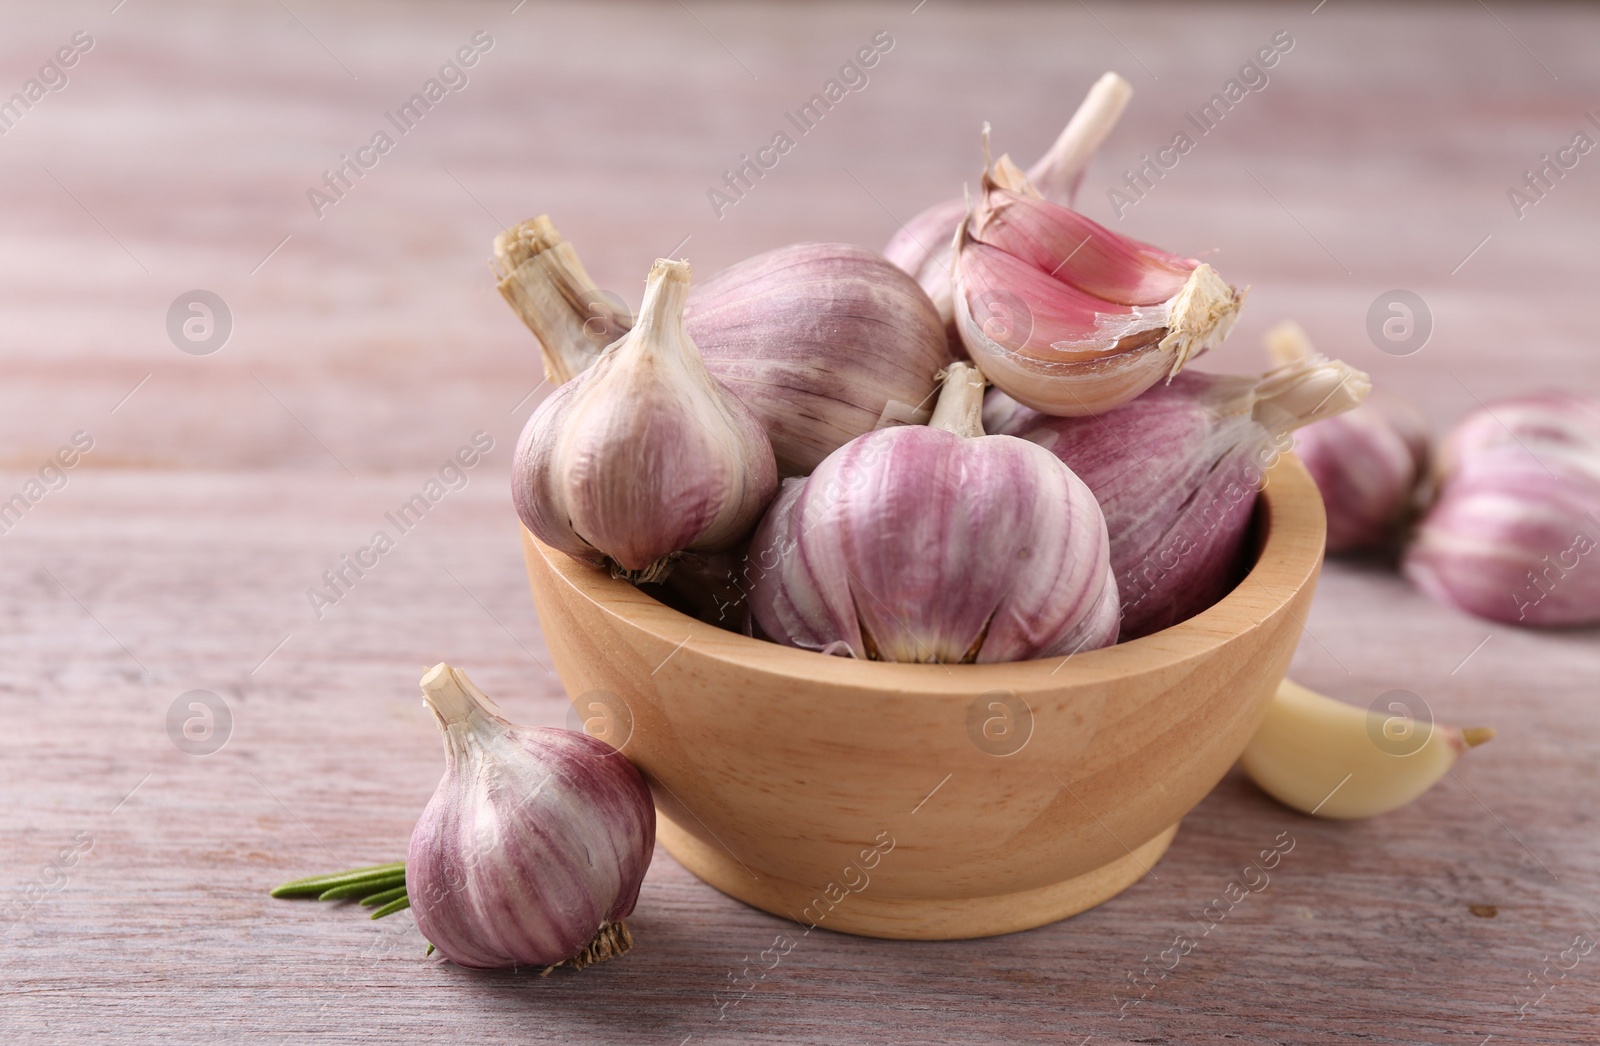 Photo of Bowl with fresh garlic on wooden table, closeup